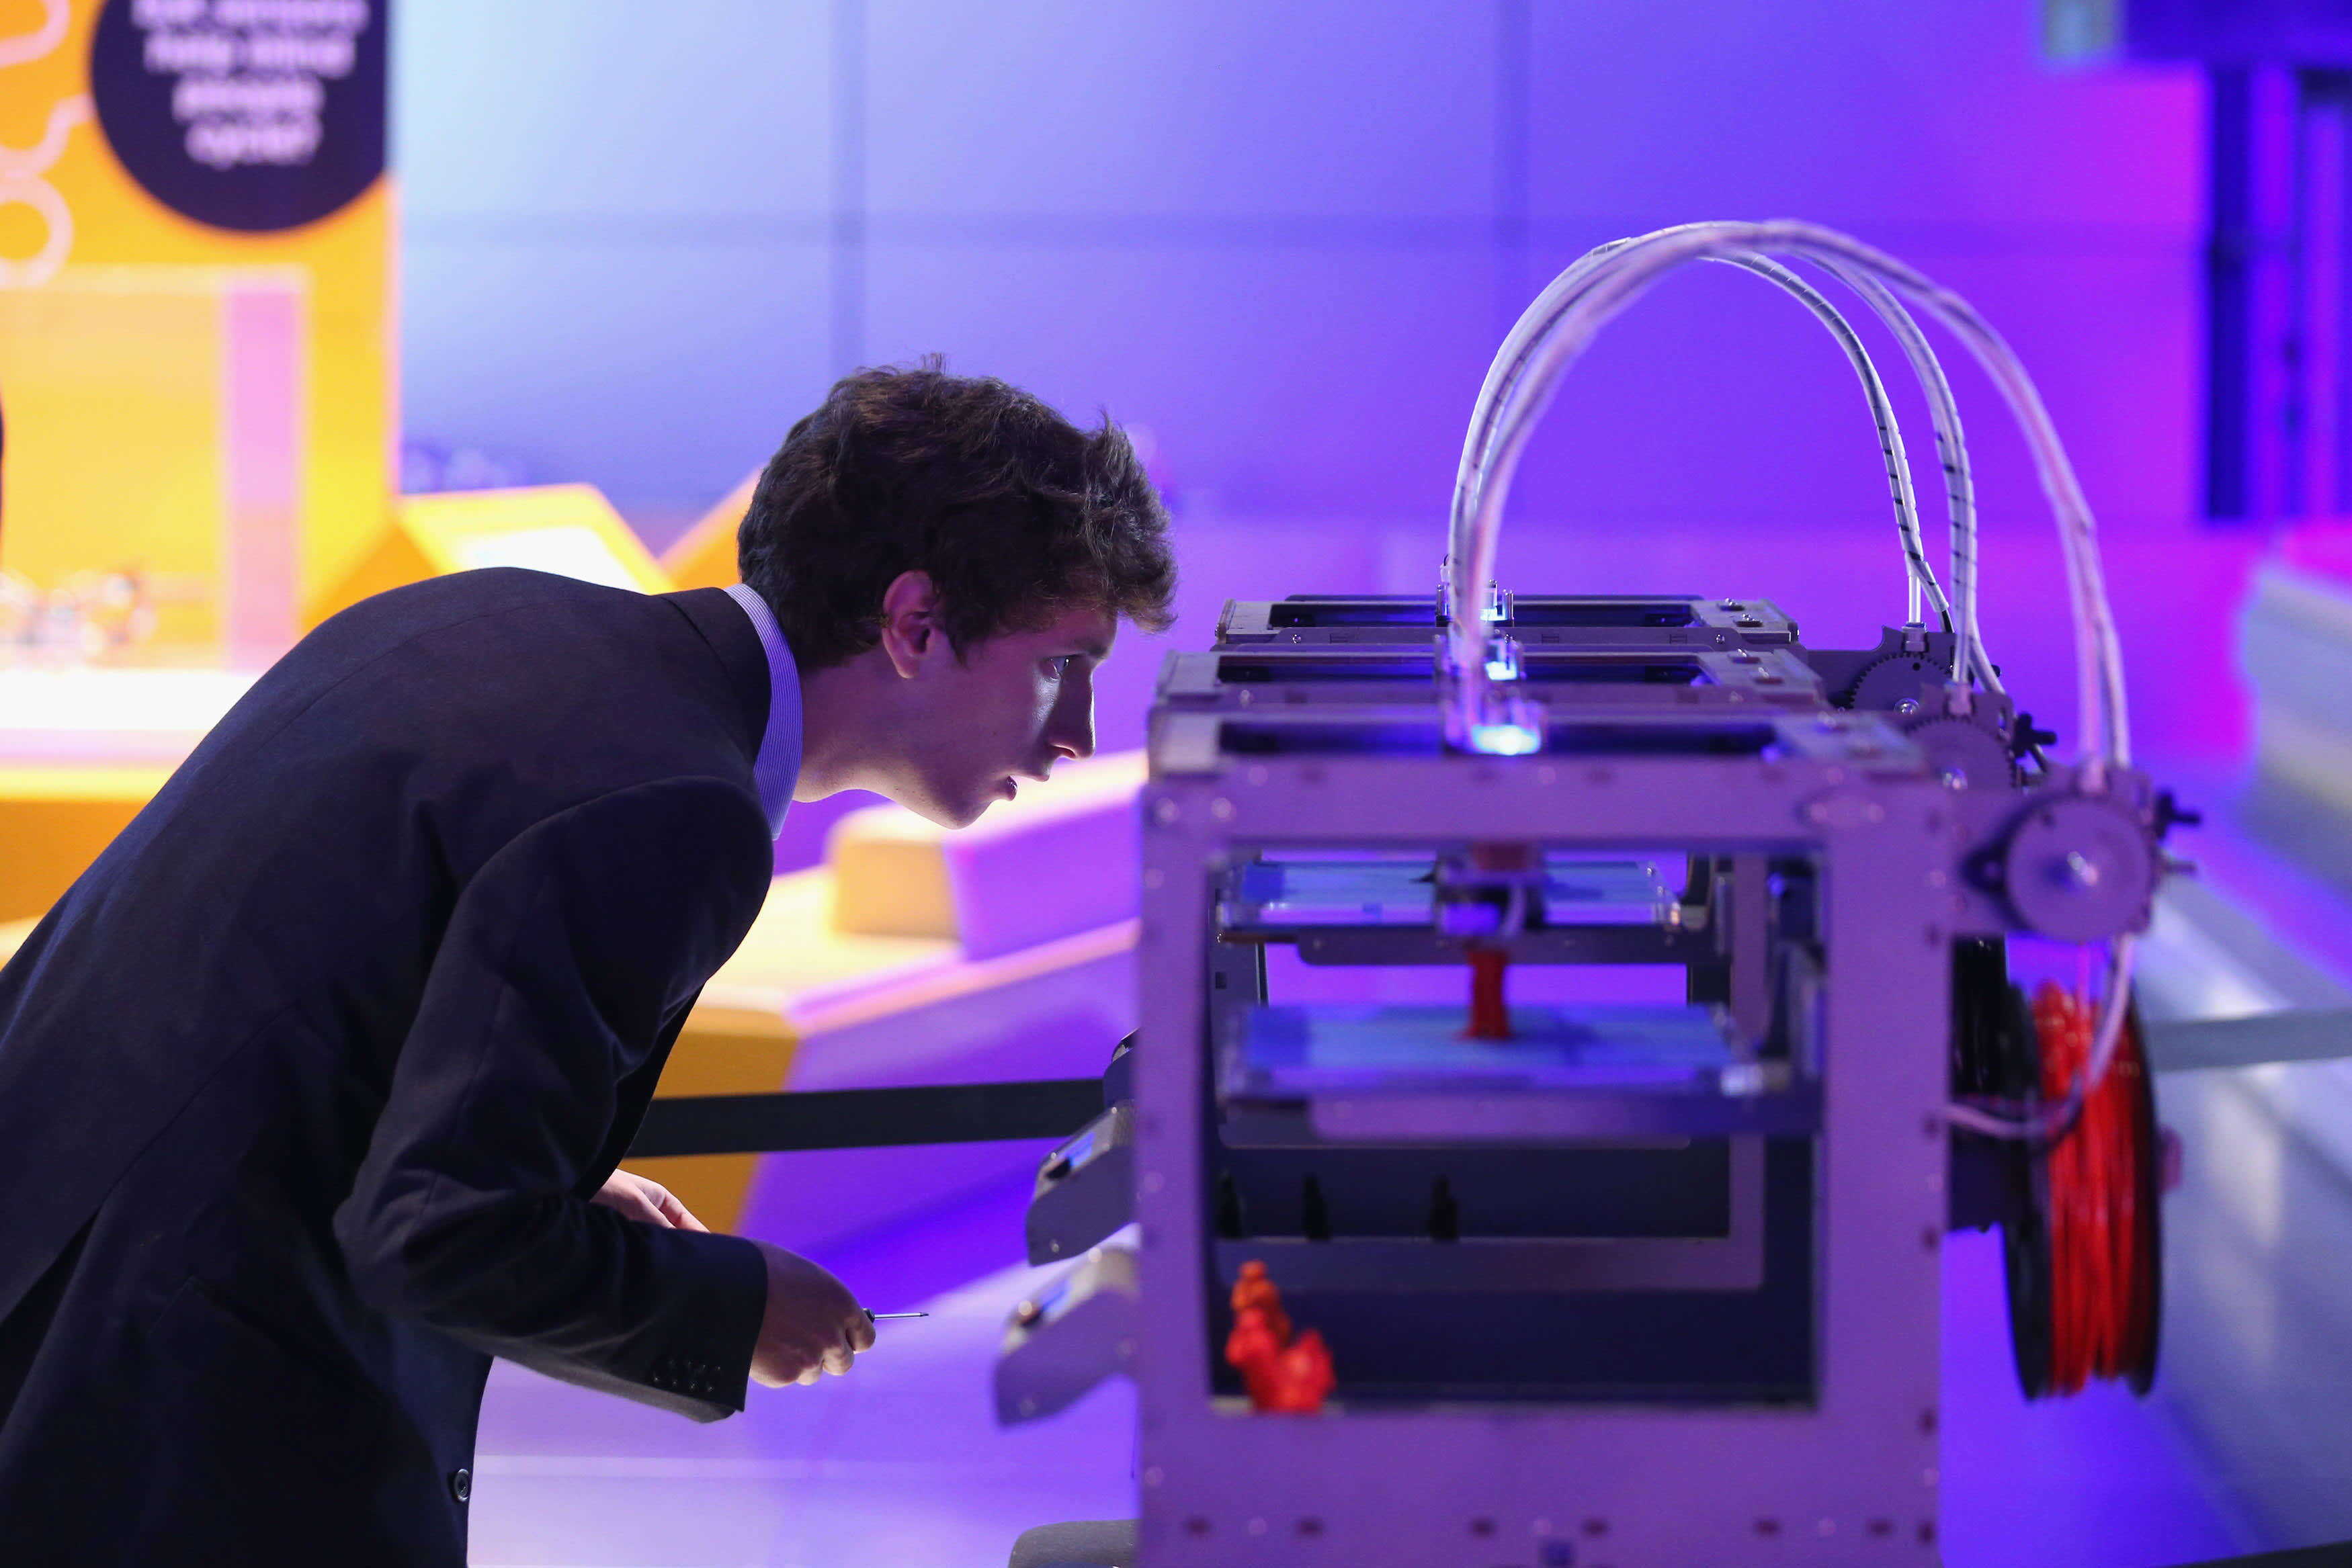 How Did 3D Printing Change The World